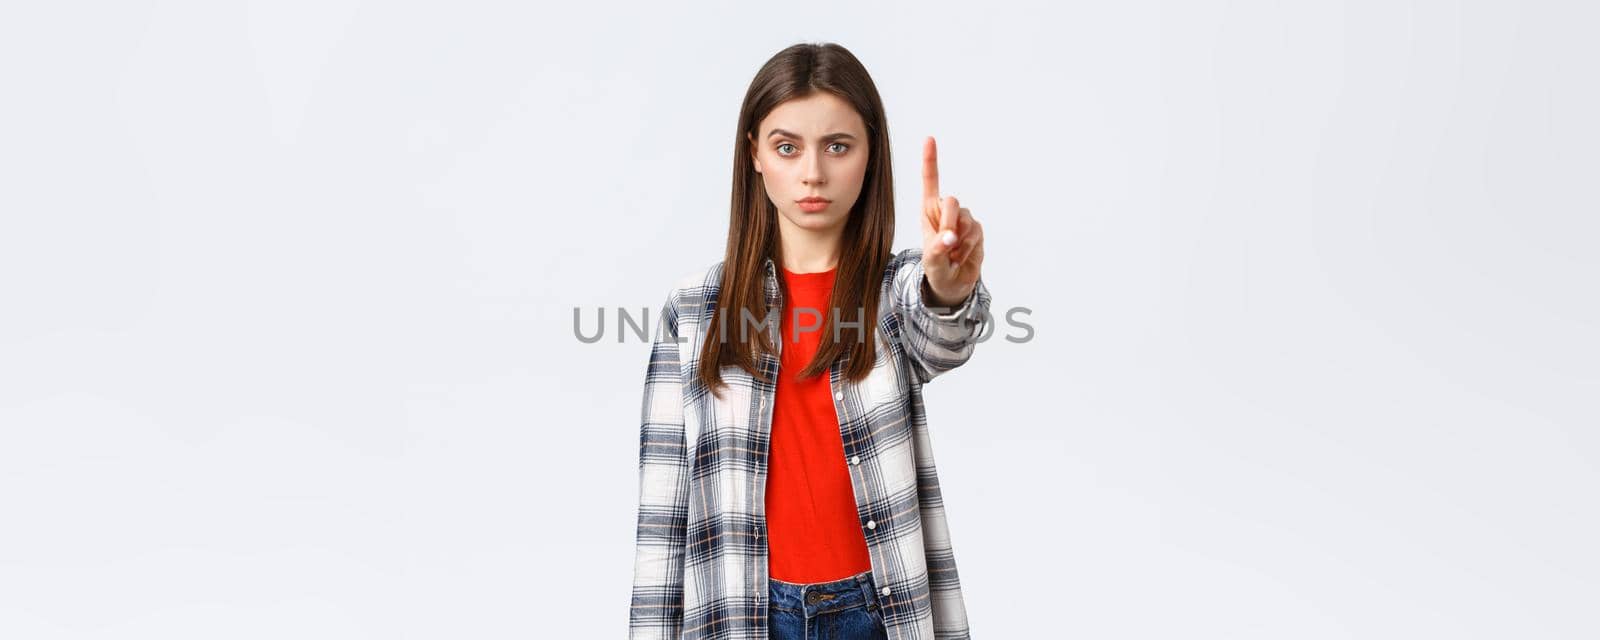 Lifestyle, different emotions, leisure activities concept. Serious concerned young woman showing index finger, scolding someone, tell to stop, warn or prohibit action, restrict from bad decision.